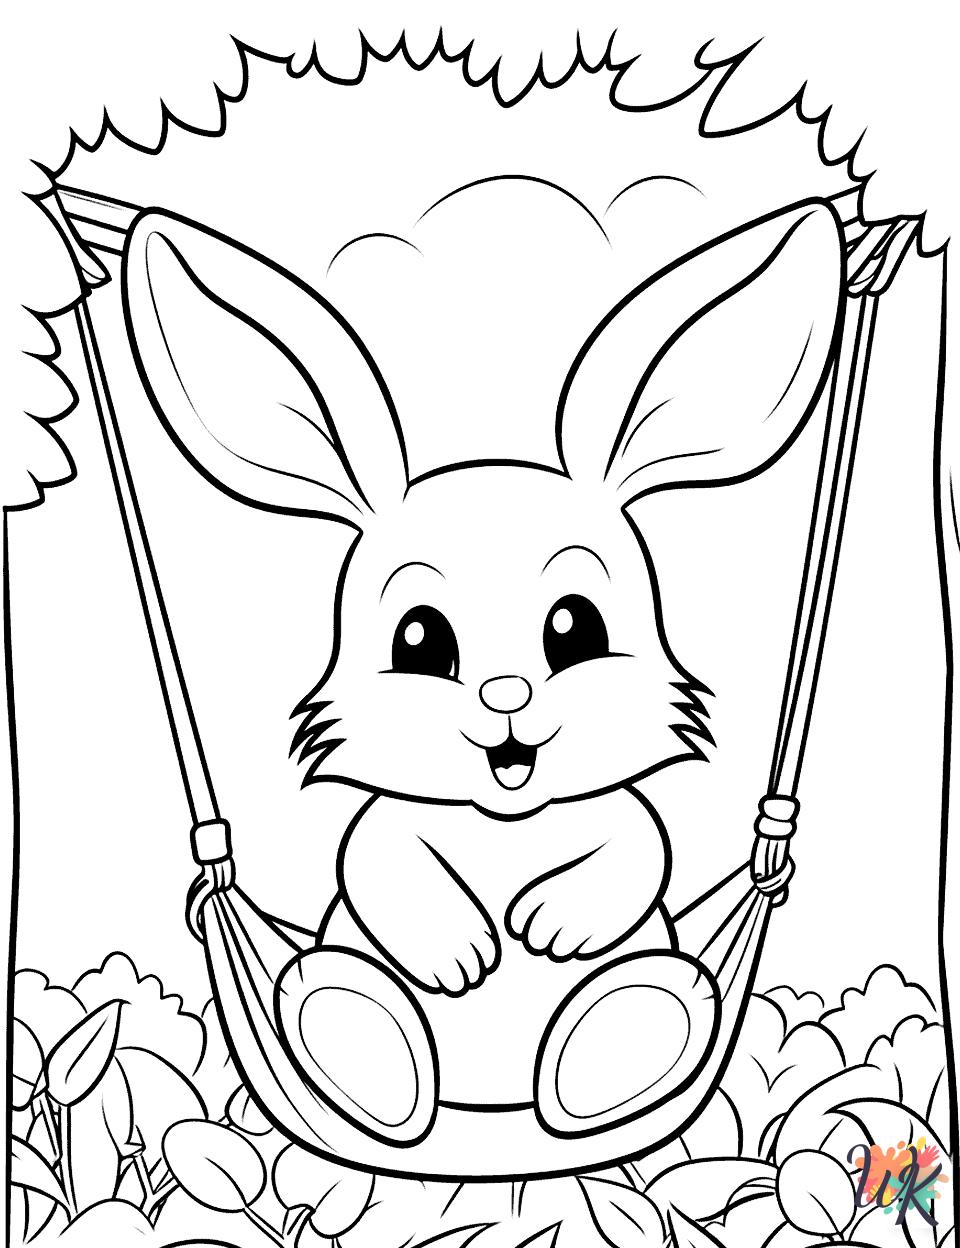 merry Rabbits coloring pages